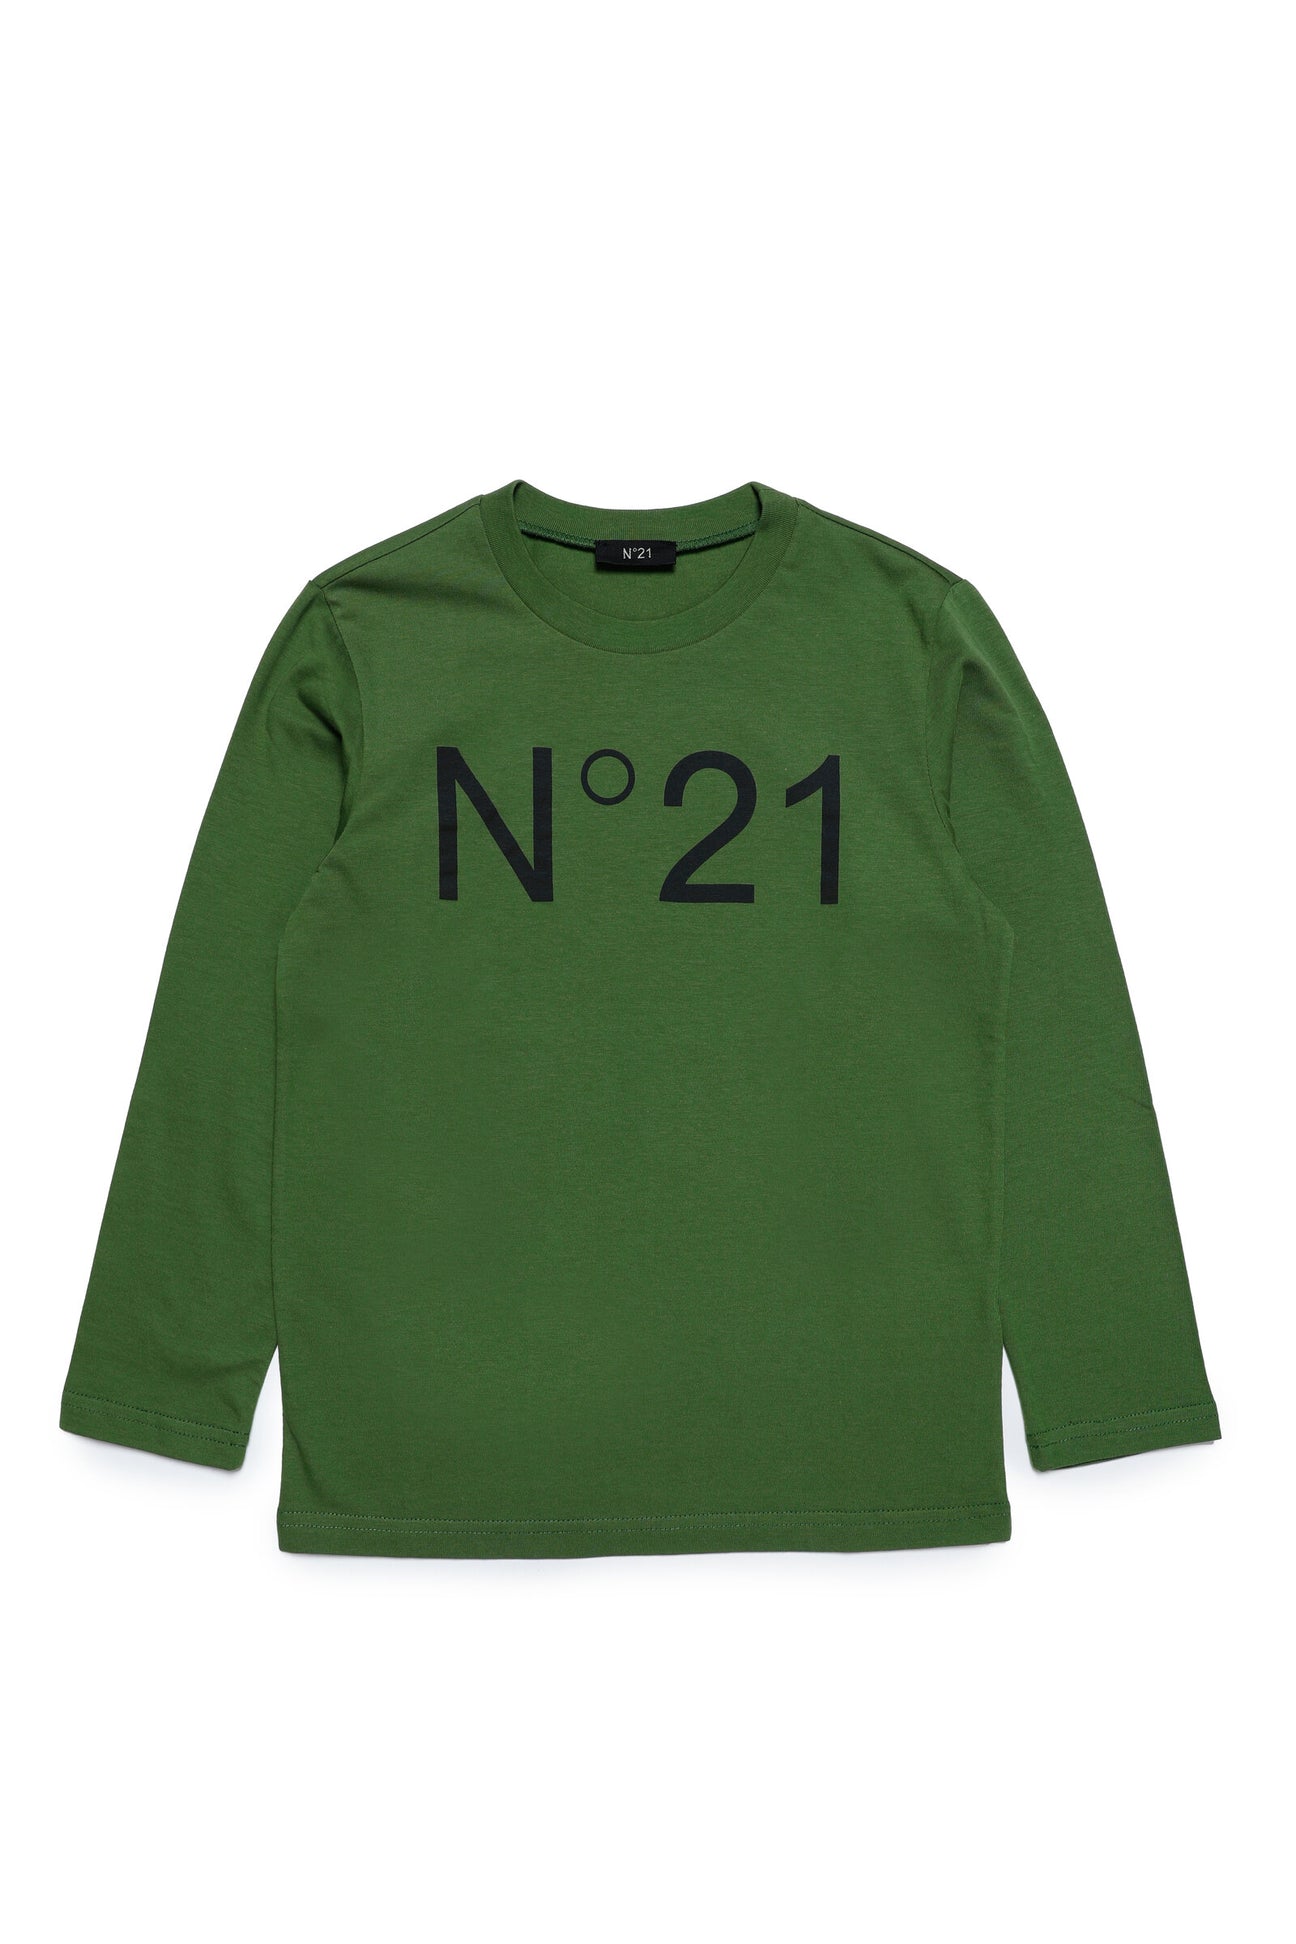 N°21 Fashion Clothing Outlet for Kids and Teens | Brave Kid